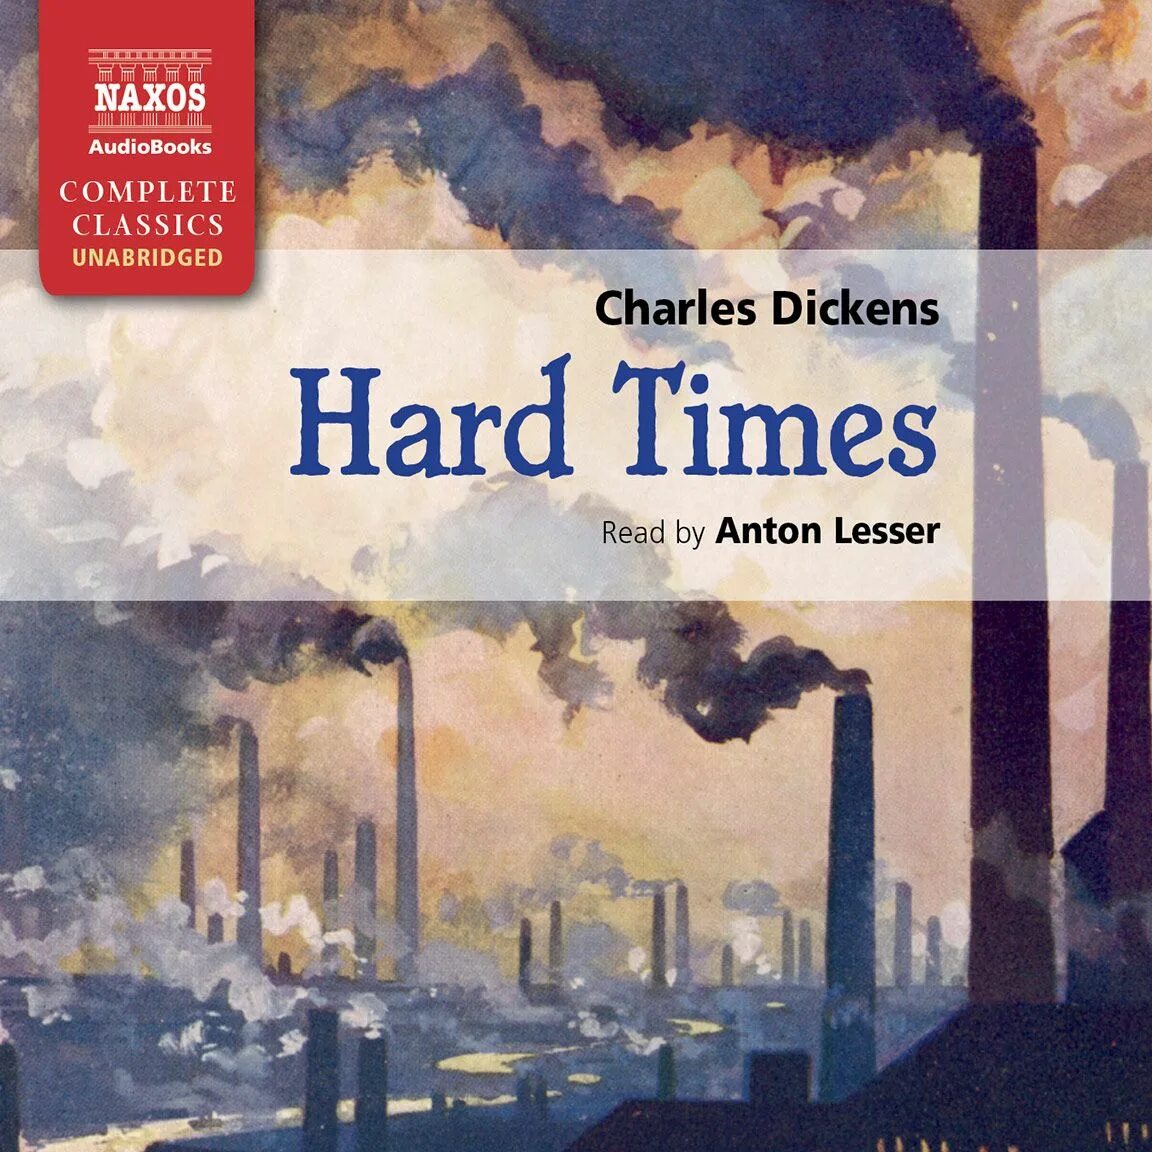 Hard times. Dickens Charles. Dickens. Hard times обложка. Тяжелые времена Диккенс. Hard times book.